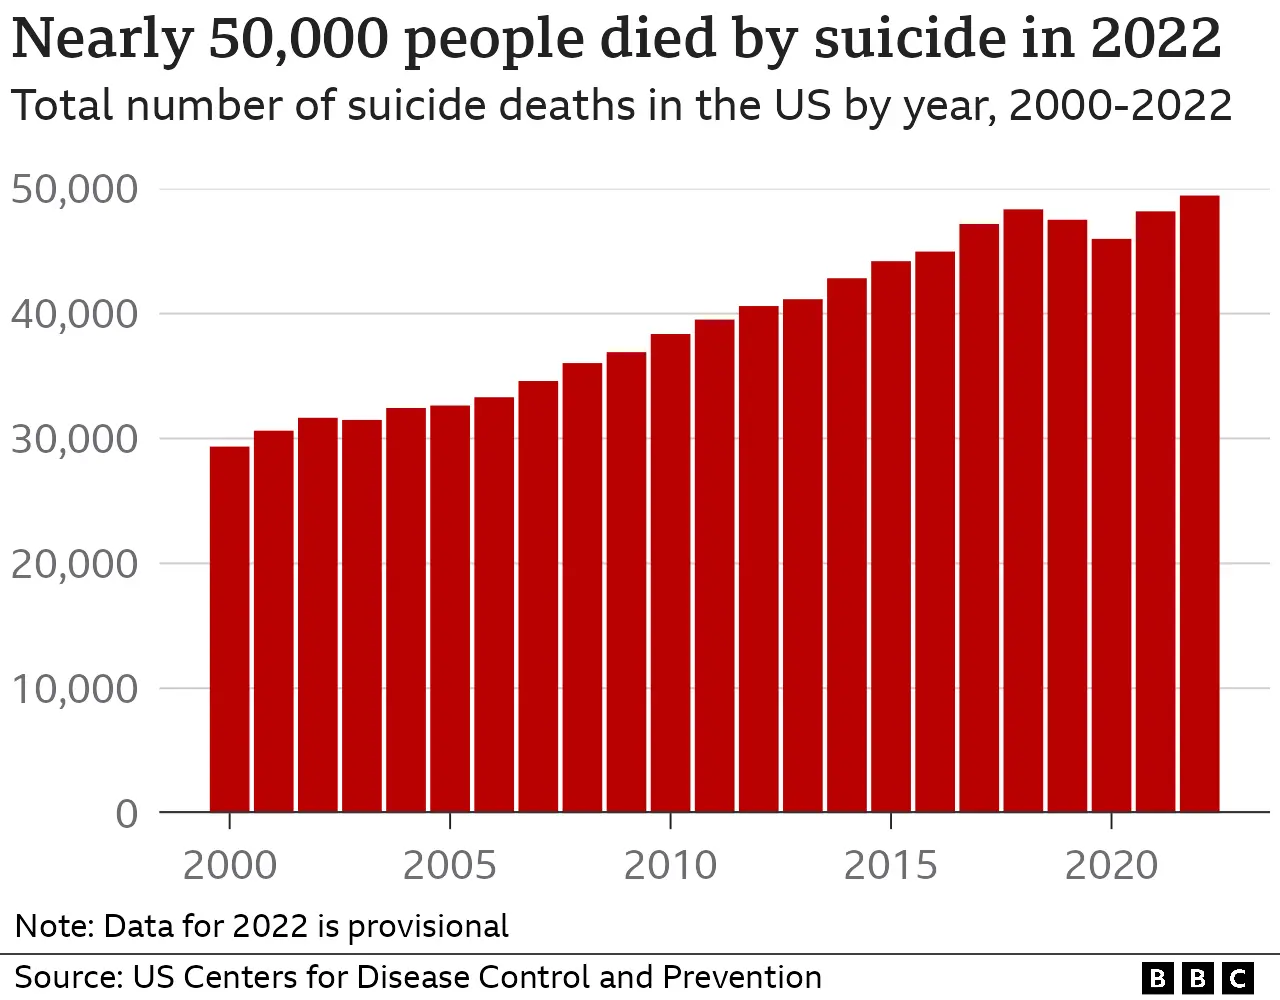 Chart showing suicides in the US have risen from slightly under 30,000 cases a year in 2000 to almost 50,000 in 2022